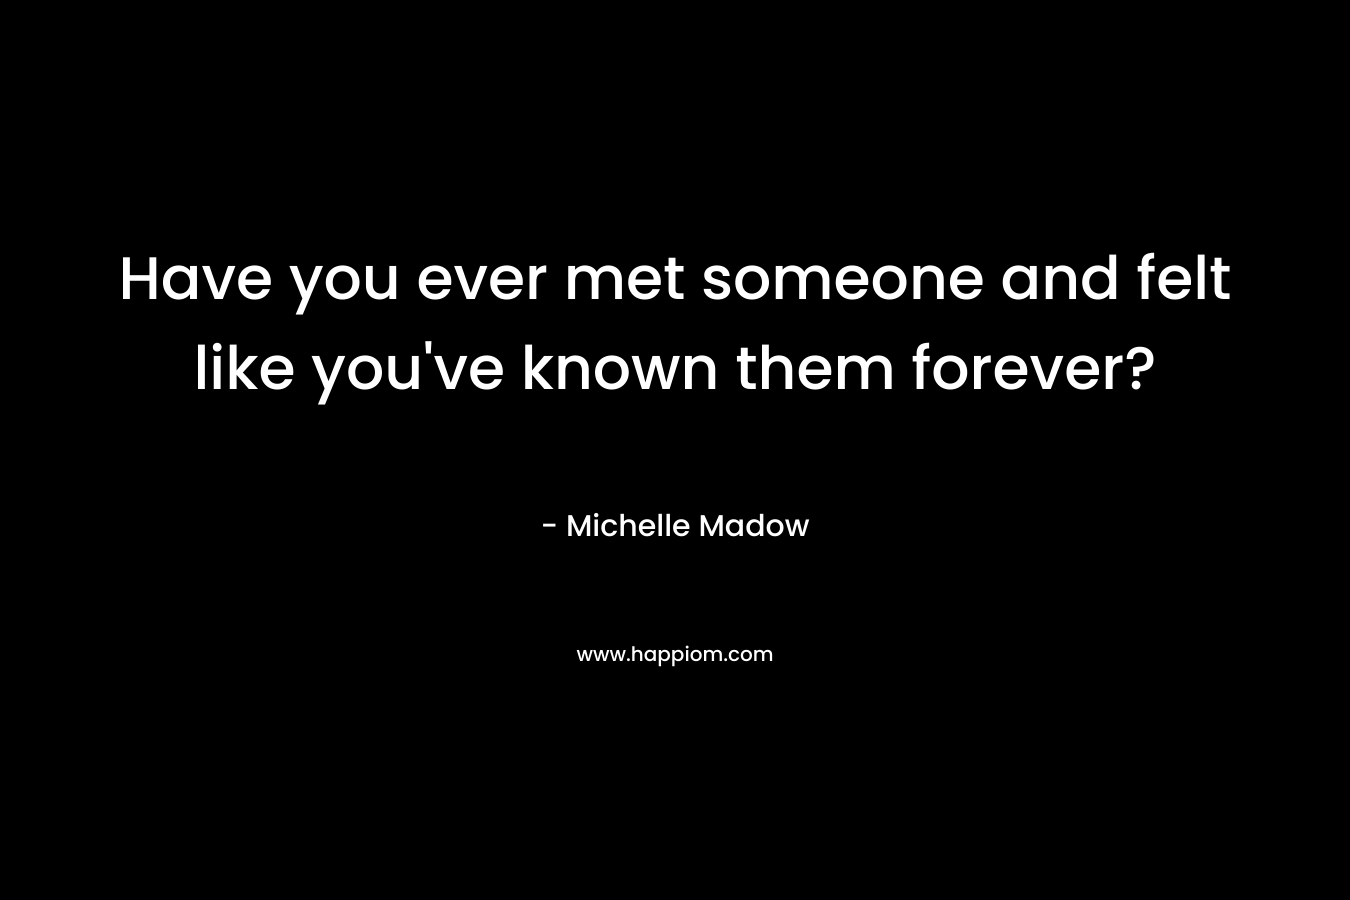 Have you ever met someone and felt like you’ve known them forever? – Michelle Madow